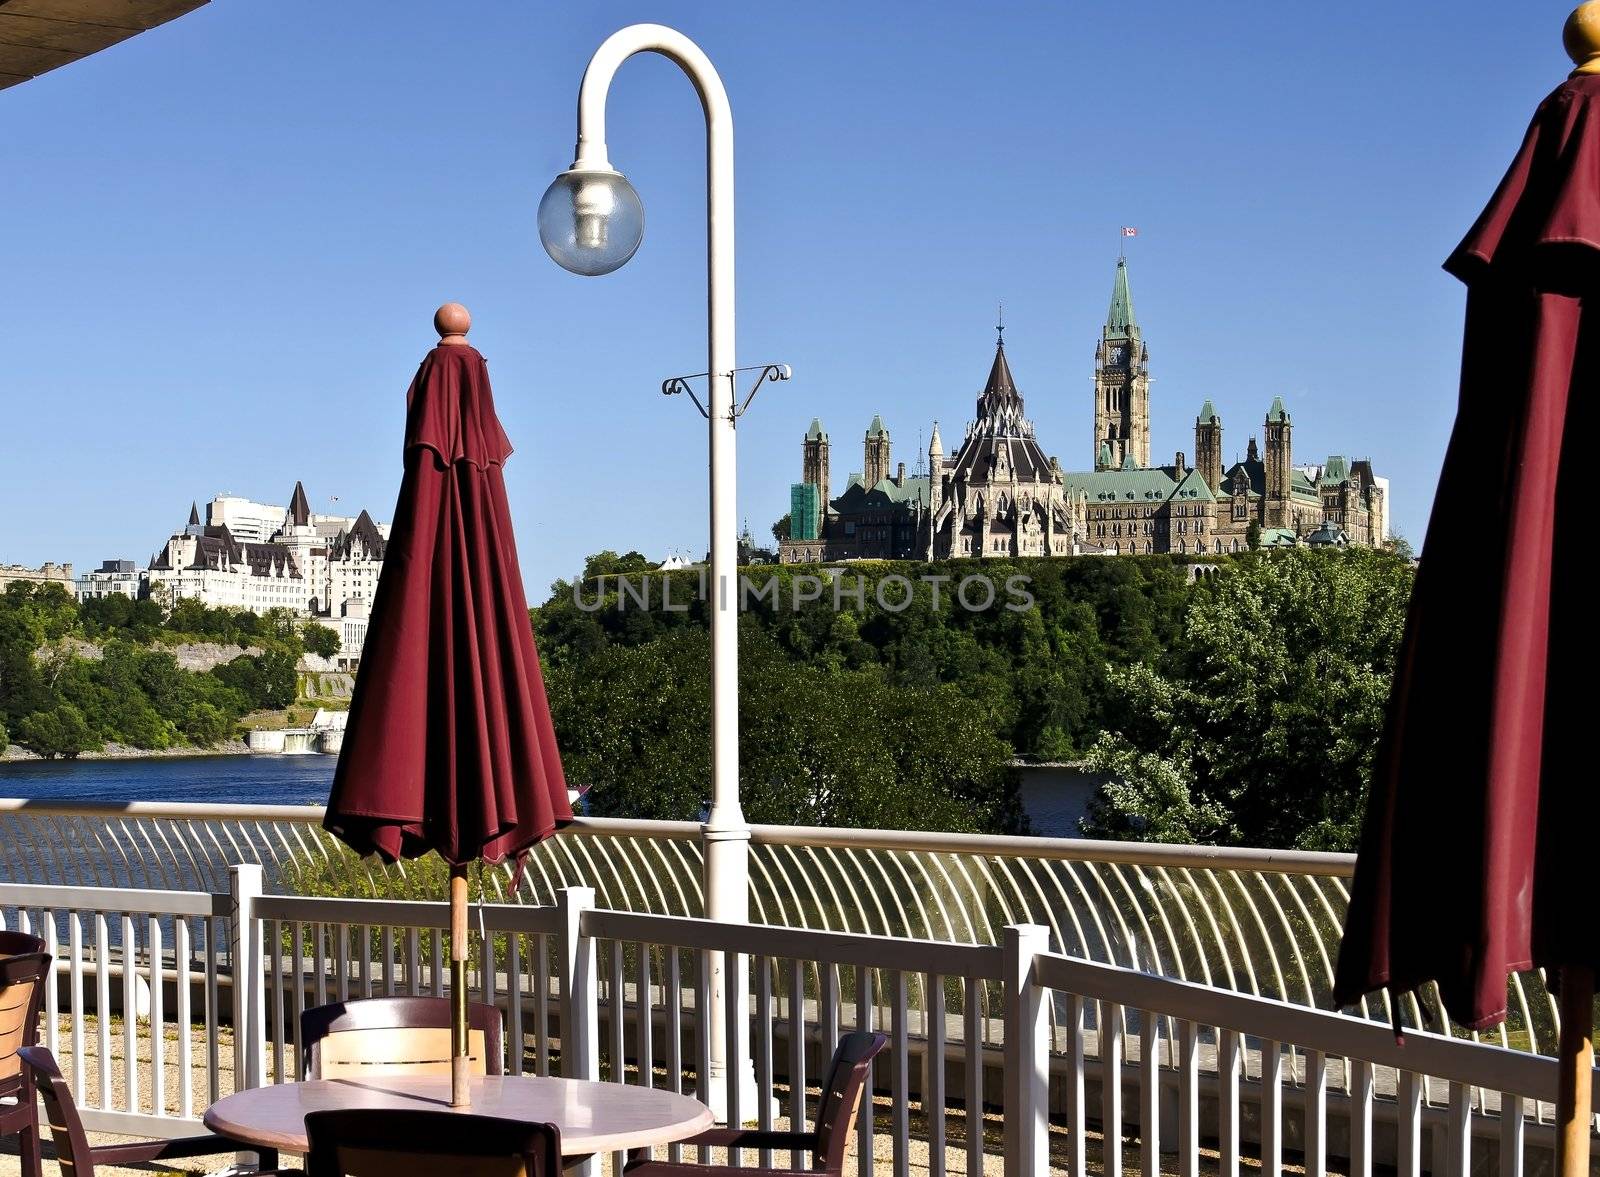 The canadian Parliament Centre block and Library seen from a patio across the Ottawa river.